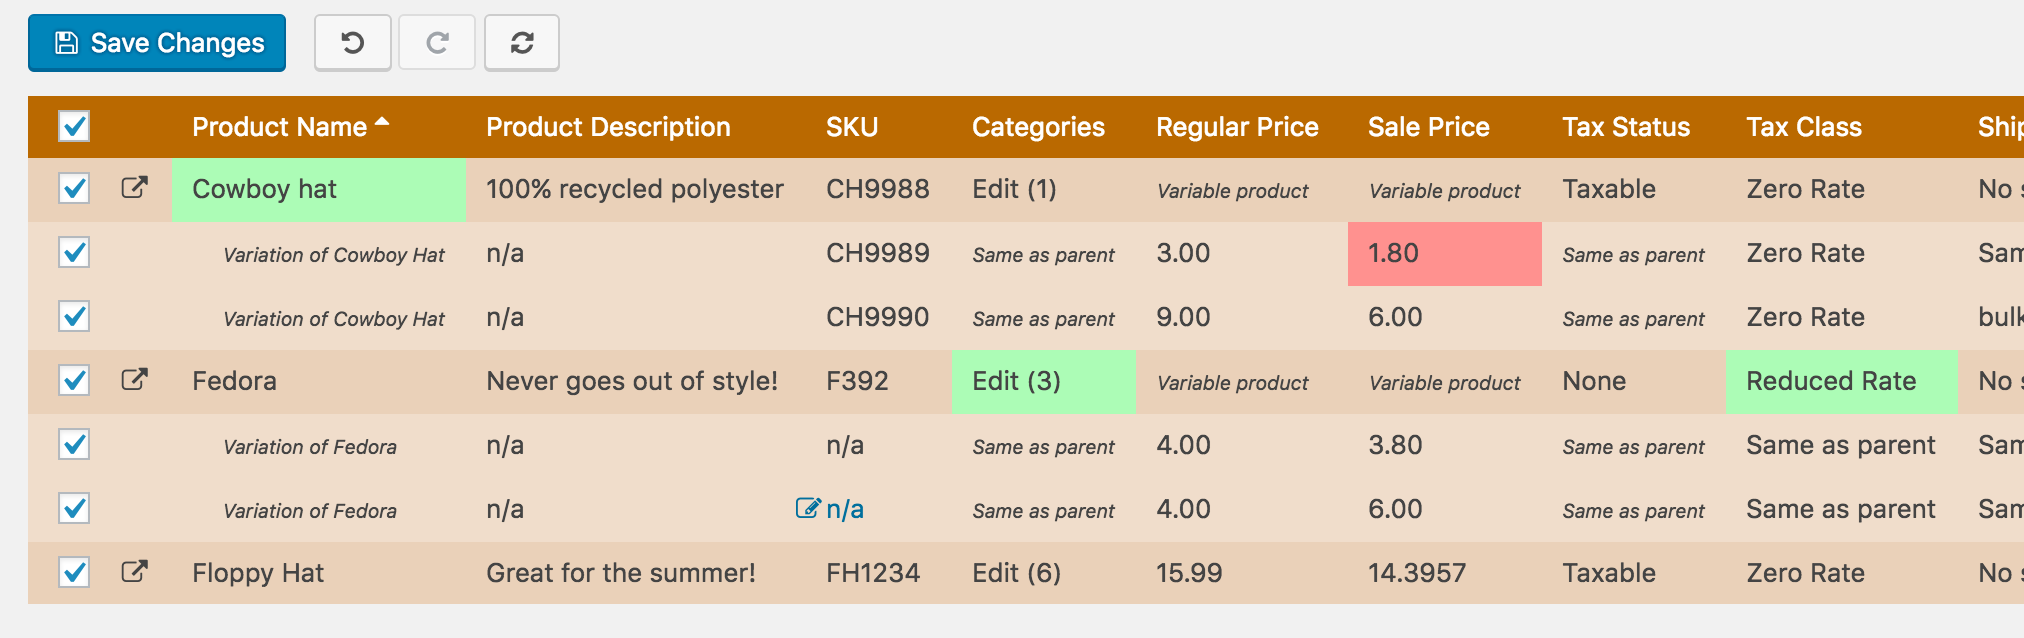 Preview all changes before saving. Price drops highlight in red to give you confidence in your changes!